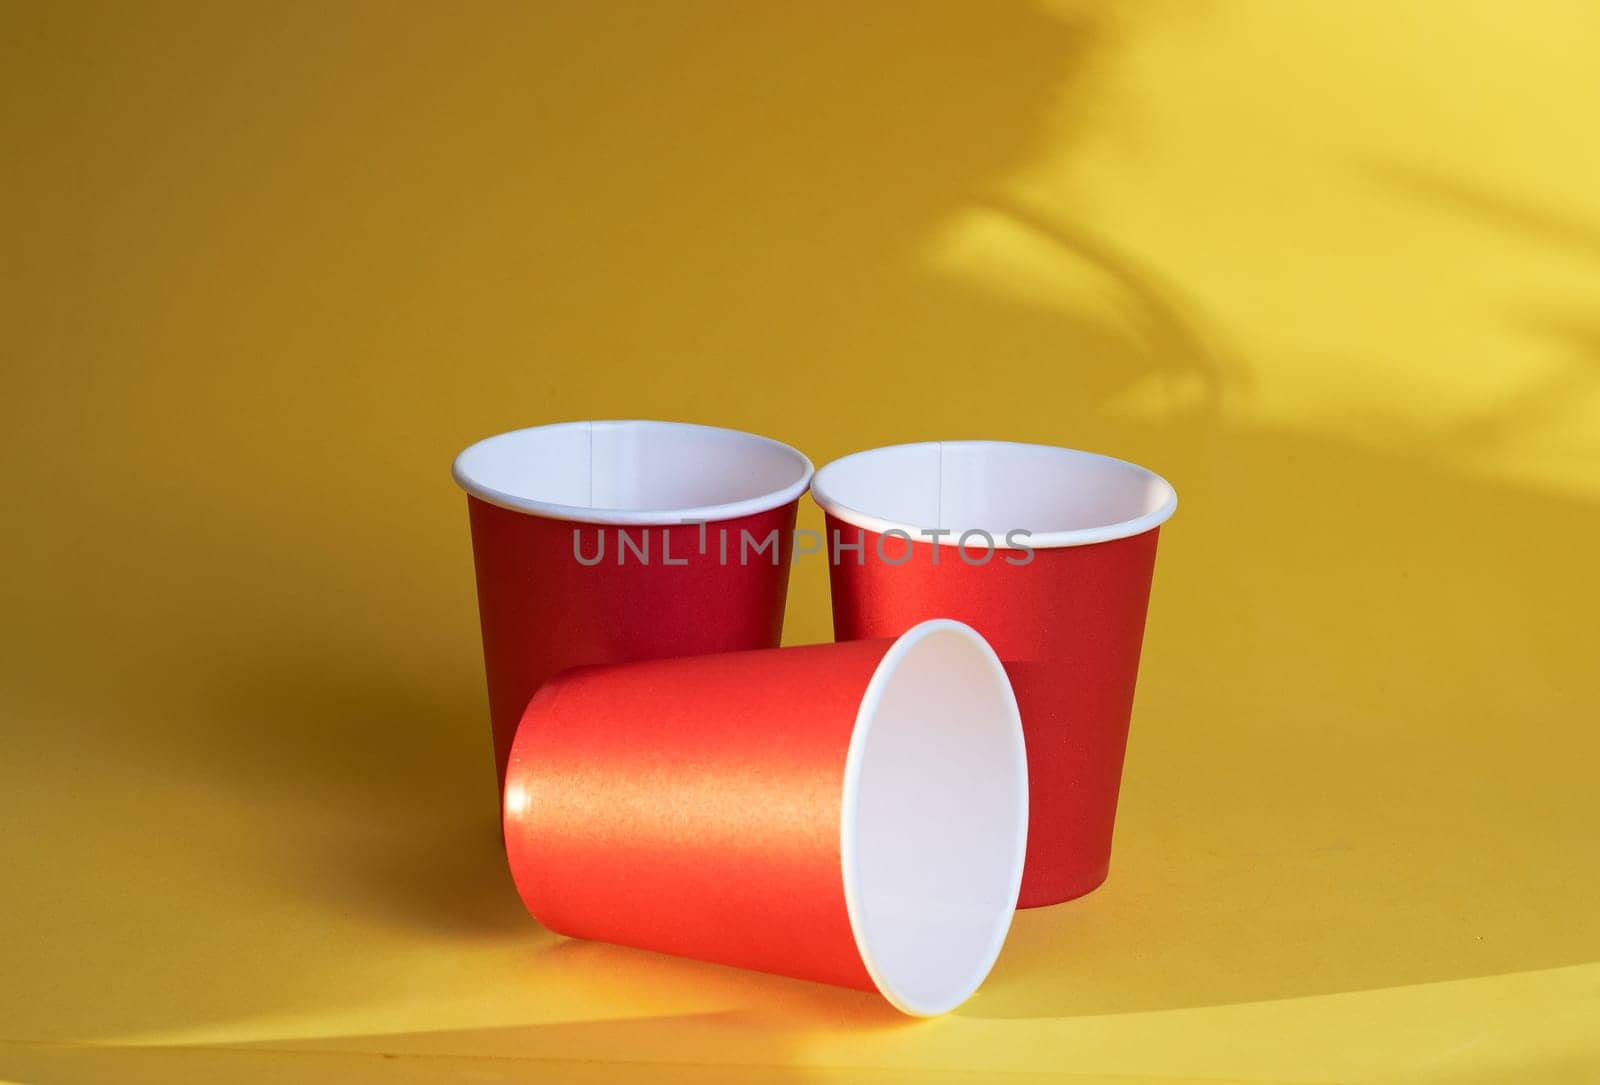 Three bright red disposable cups on a yellow background by Севостьянов